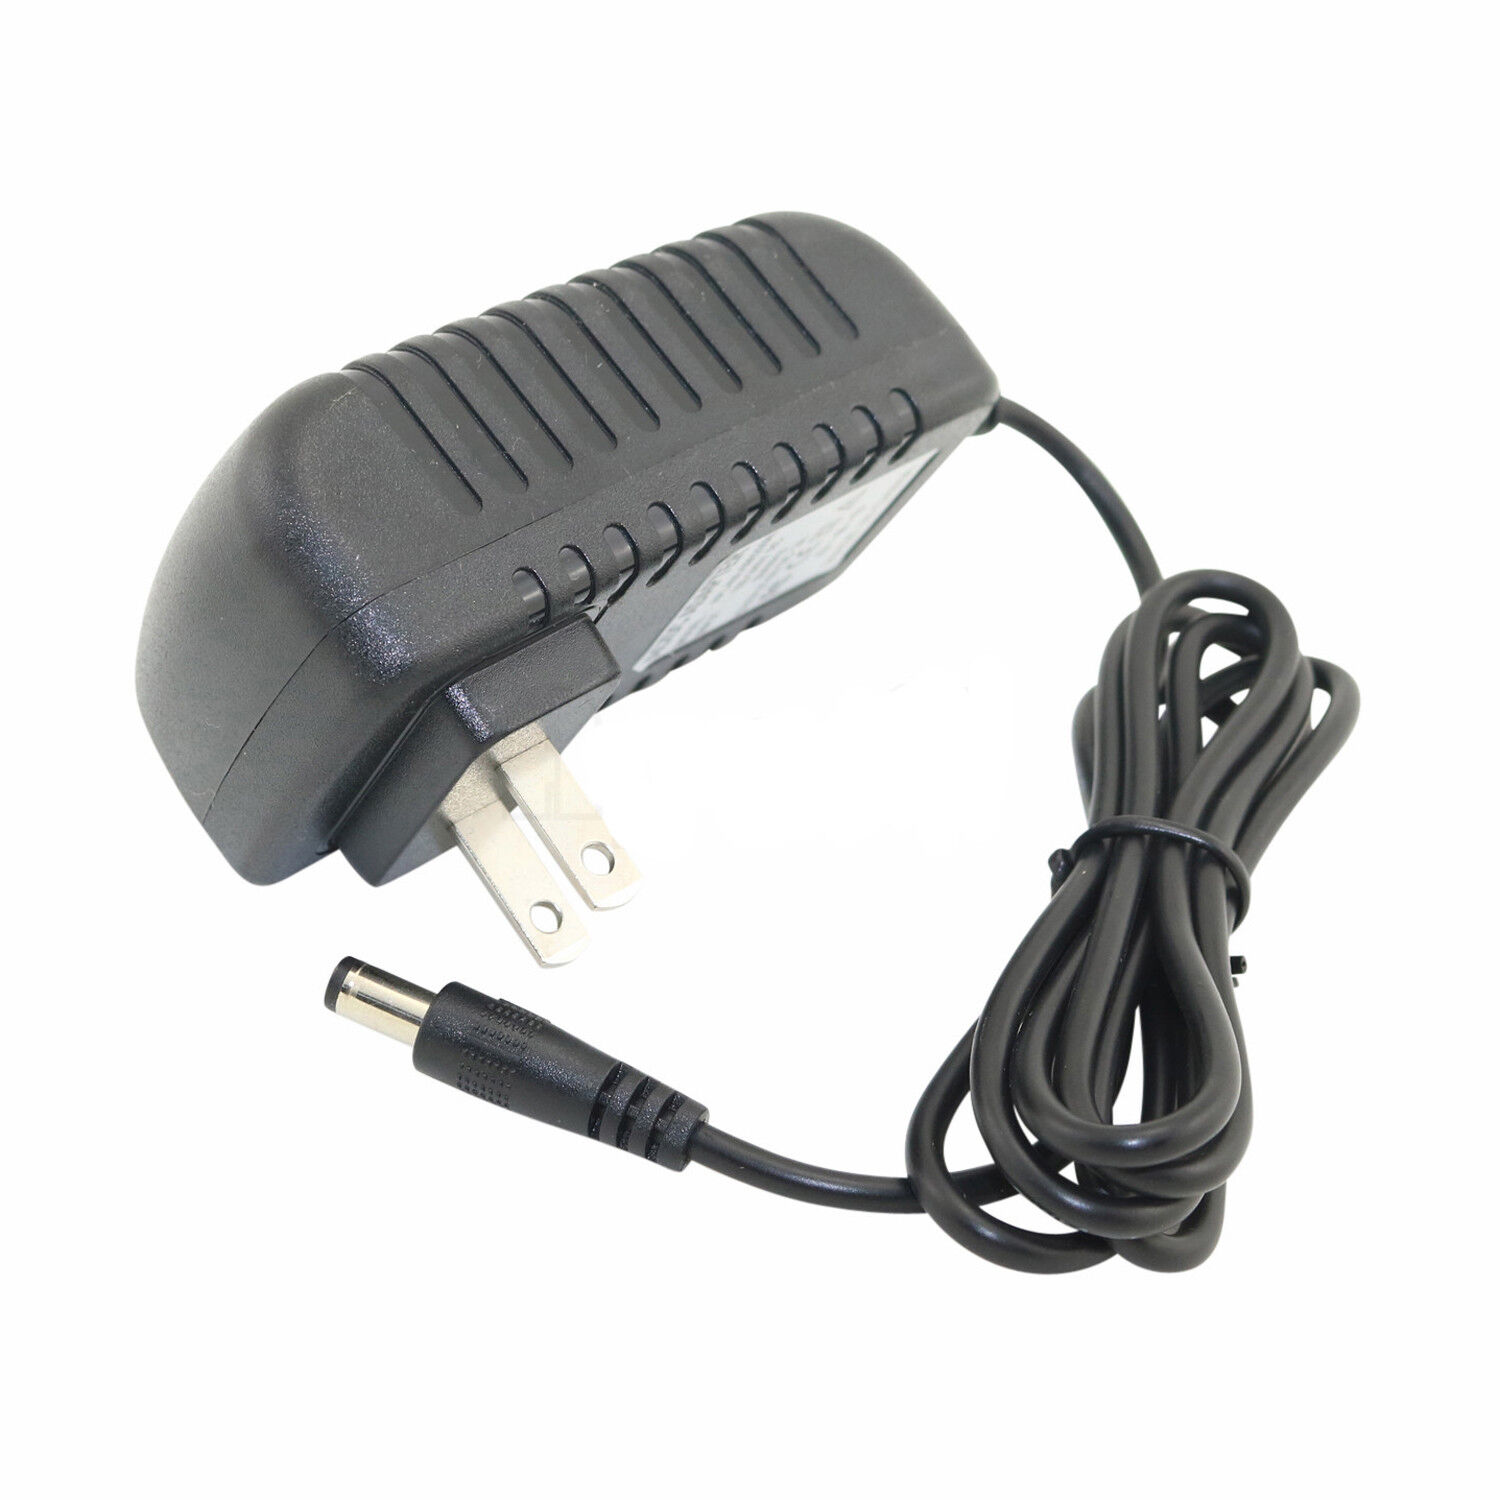 AC Adapter For Getac B300 B300X Fully Rugged Laptop Charger Power Supply Cord Brand Unbranded Bundled Items Power C - Click Image to Close